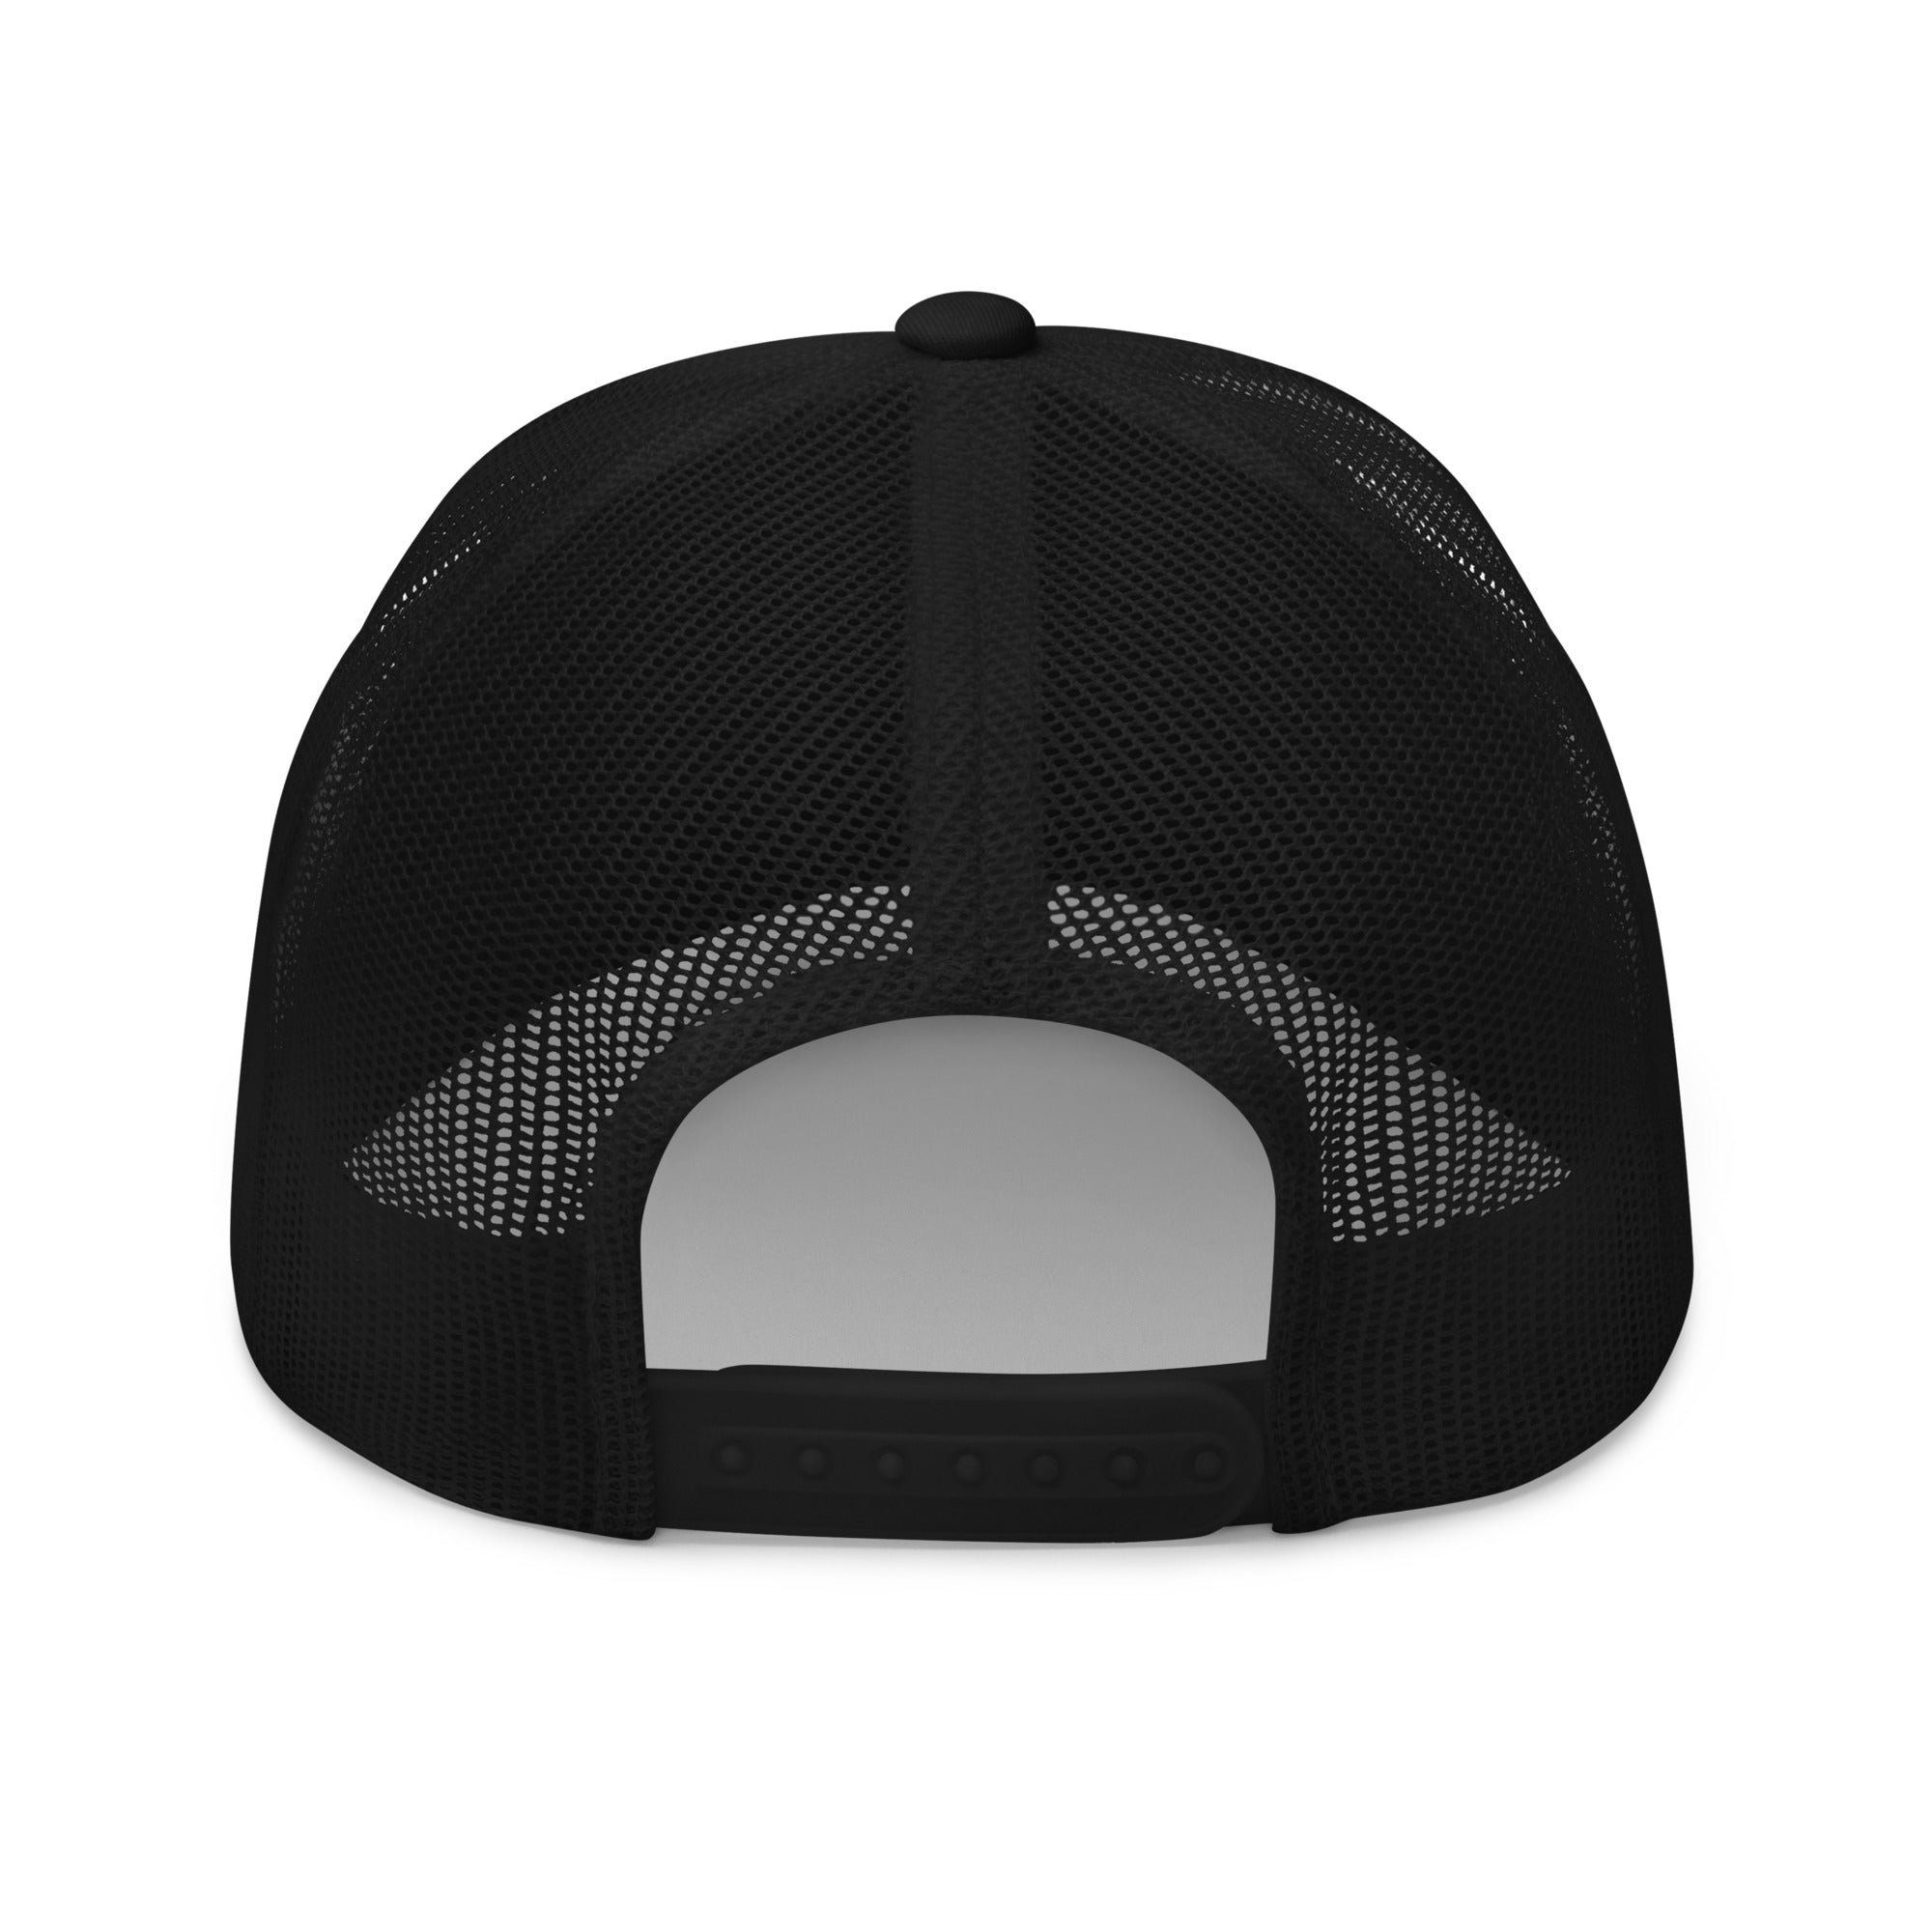 Crypto Hat - The Crypto Life Trucker Hat has mesh back panels and a snapback closure. Back view.